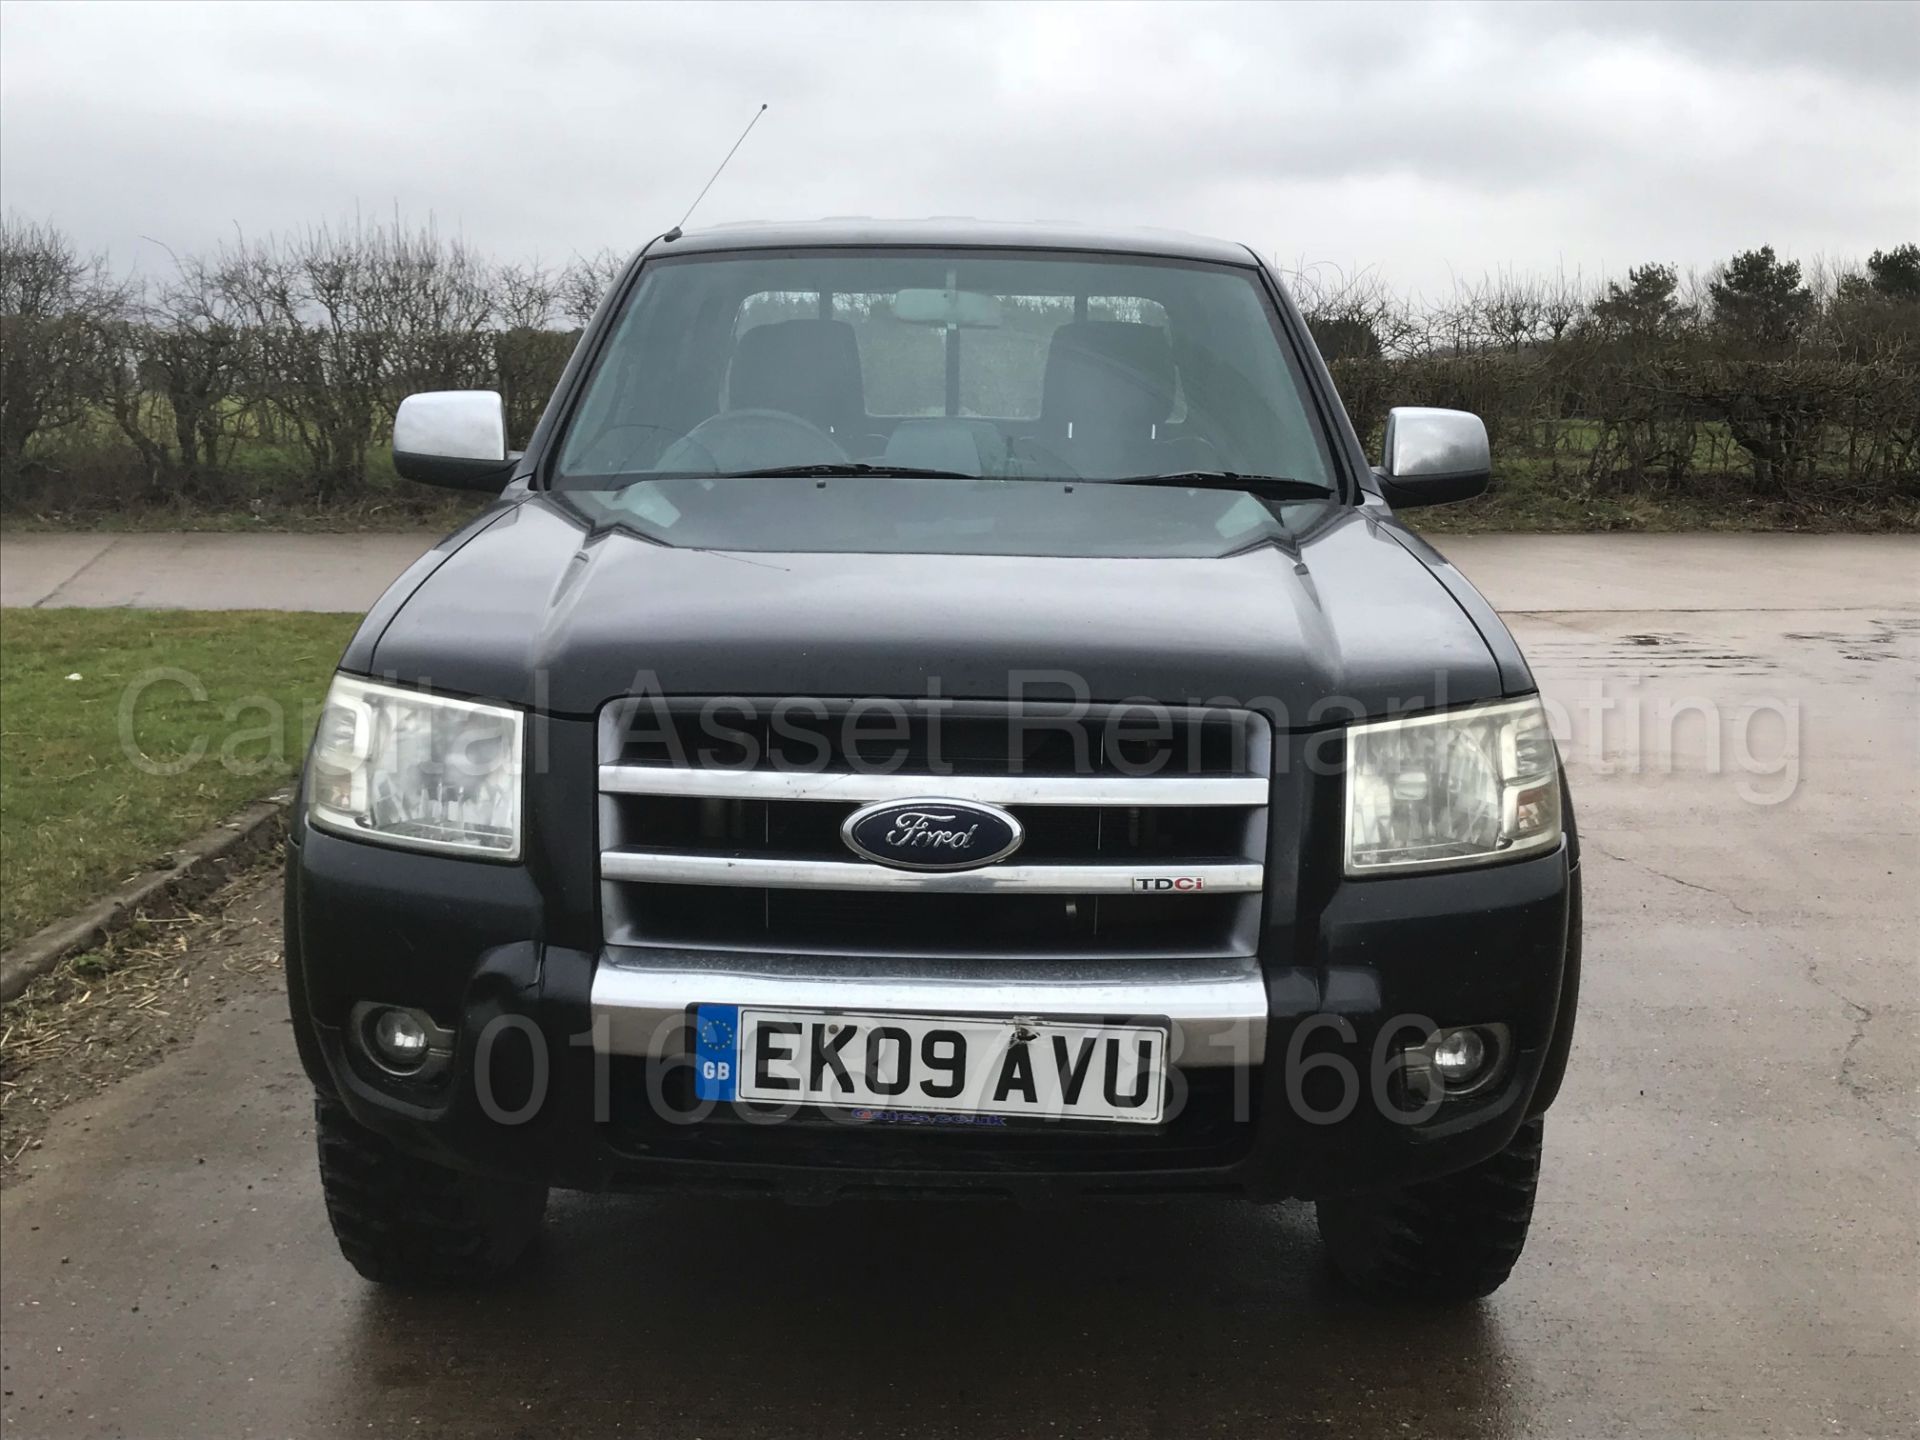 FORD RANGER 'THUNDER' DOUBLE CAB PICK-UP (2009 ) '2.5 TDCI - 143 BHP' *LEATHER - AIR CON* (NO VAT) - Image 11 of 29